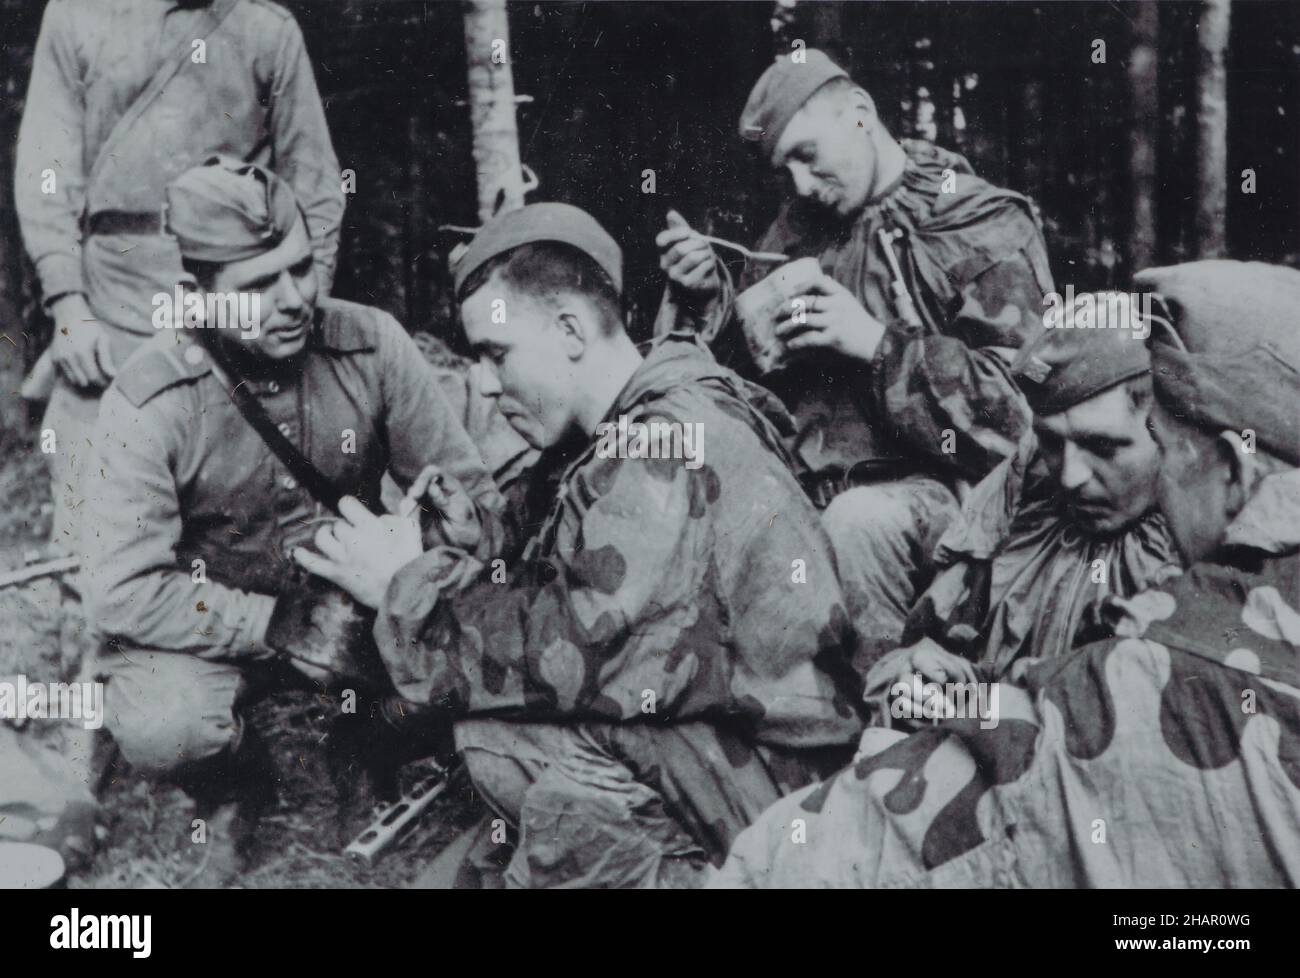 Scouts of the Red Army and the 1st Czechoslovak Army Corps Army rest and eat in September 1944. Black and white vintage photograph by an unknown photographer. Stock Photo